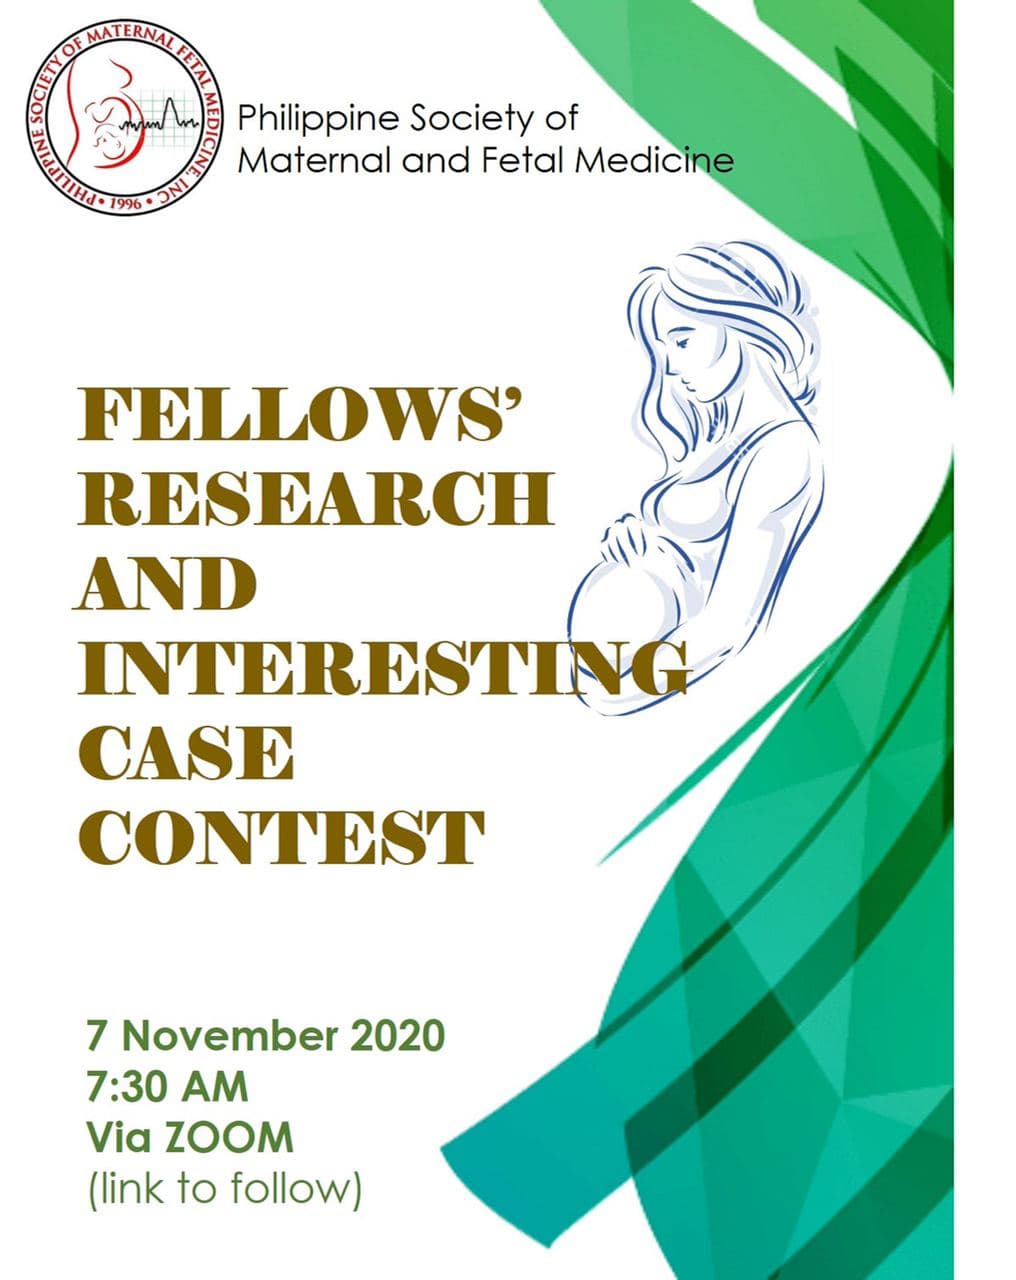 Fellows’ Research and Interesting Case Contest